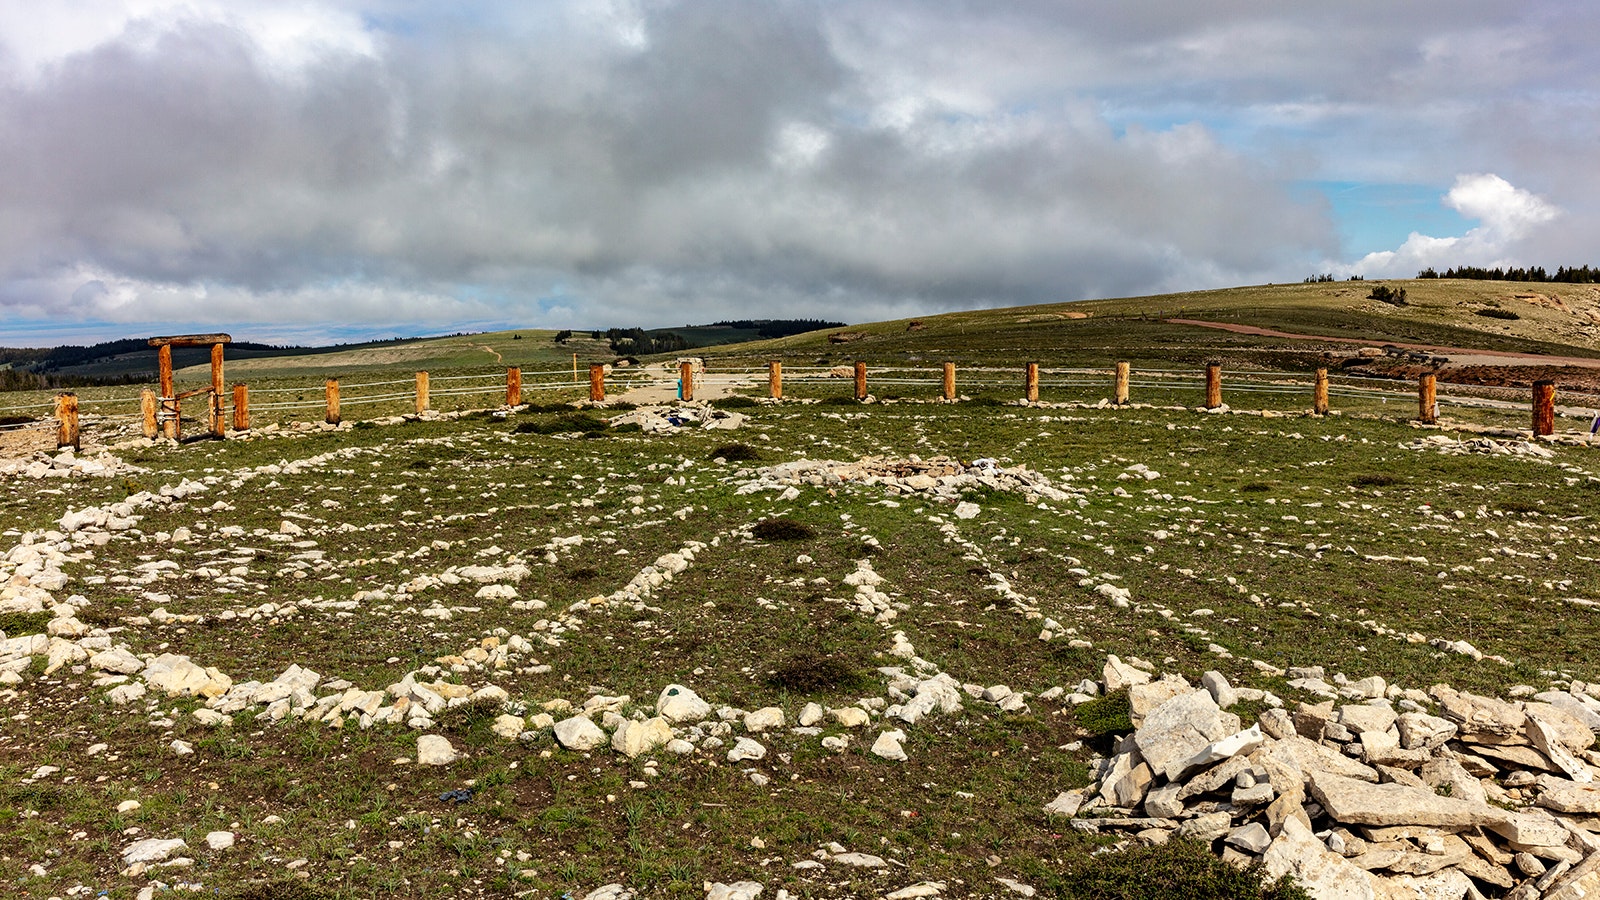 The Medicine Wheel at Medicine Mountain National Historic Landmark in the Bighorn Mountains of Wyoming.